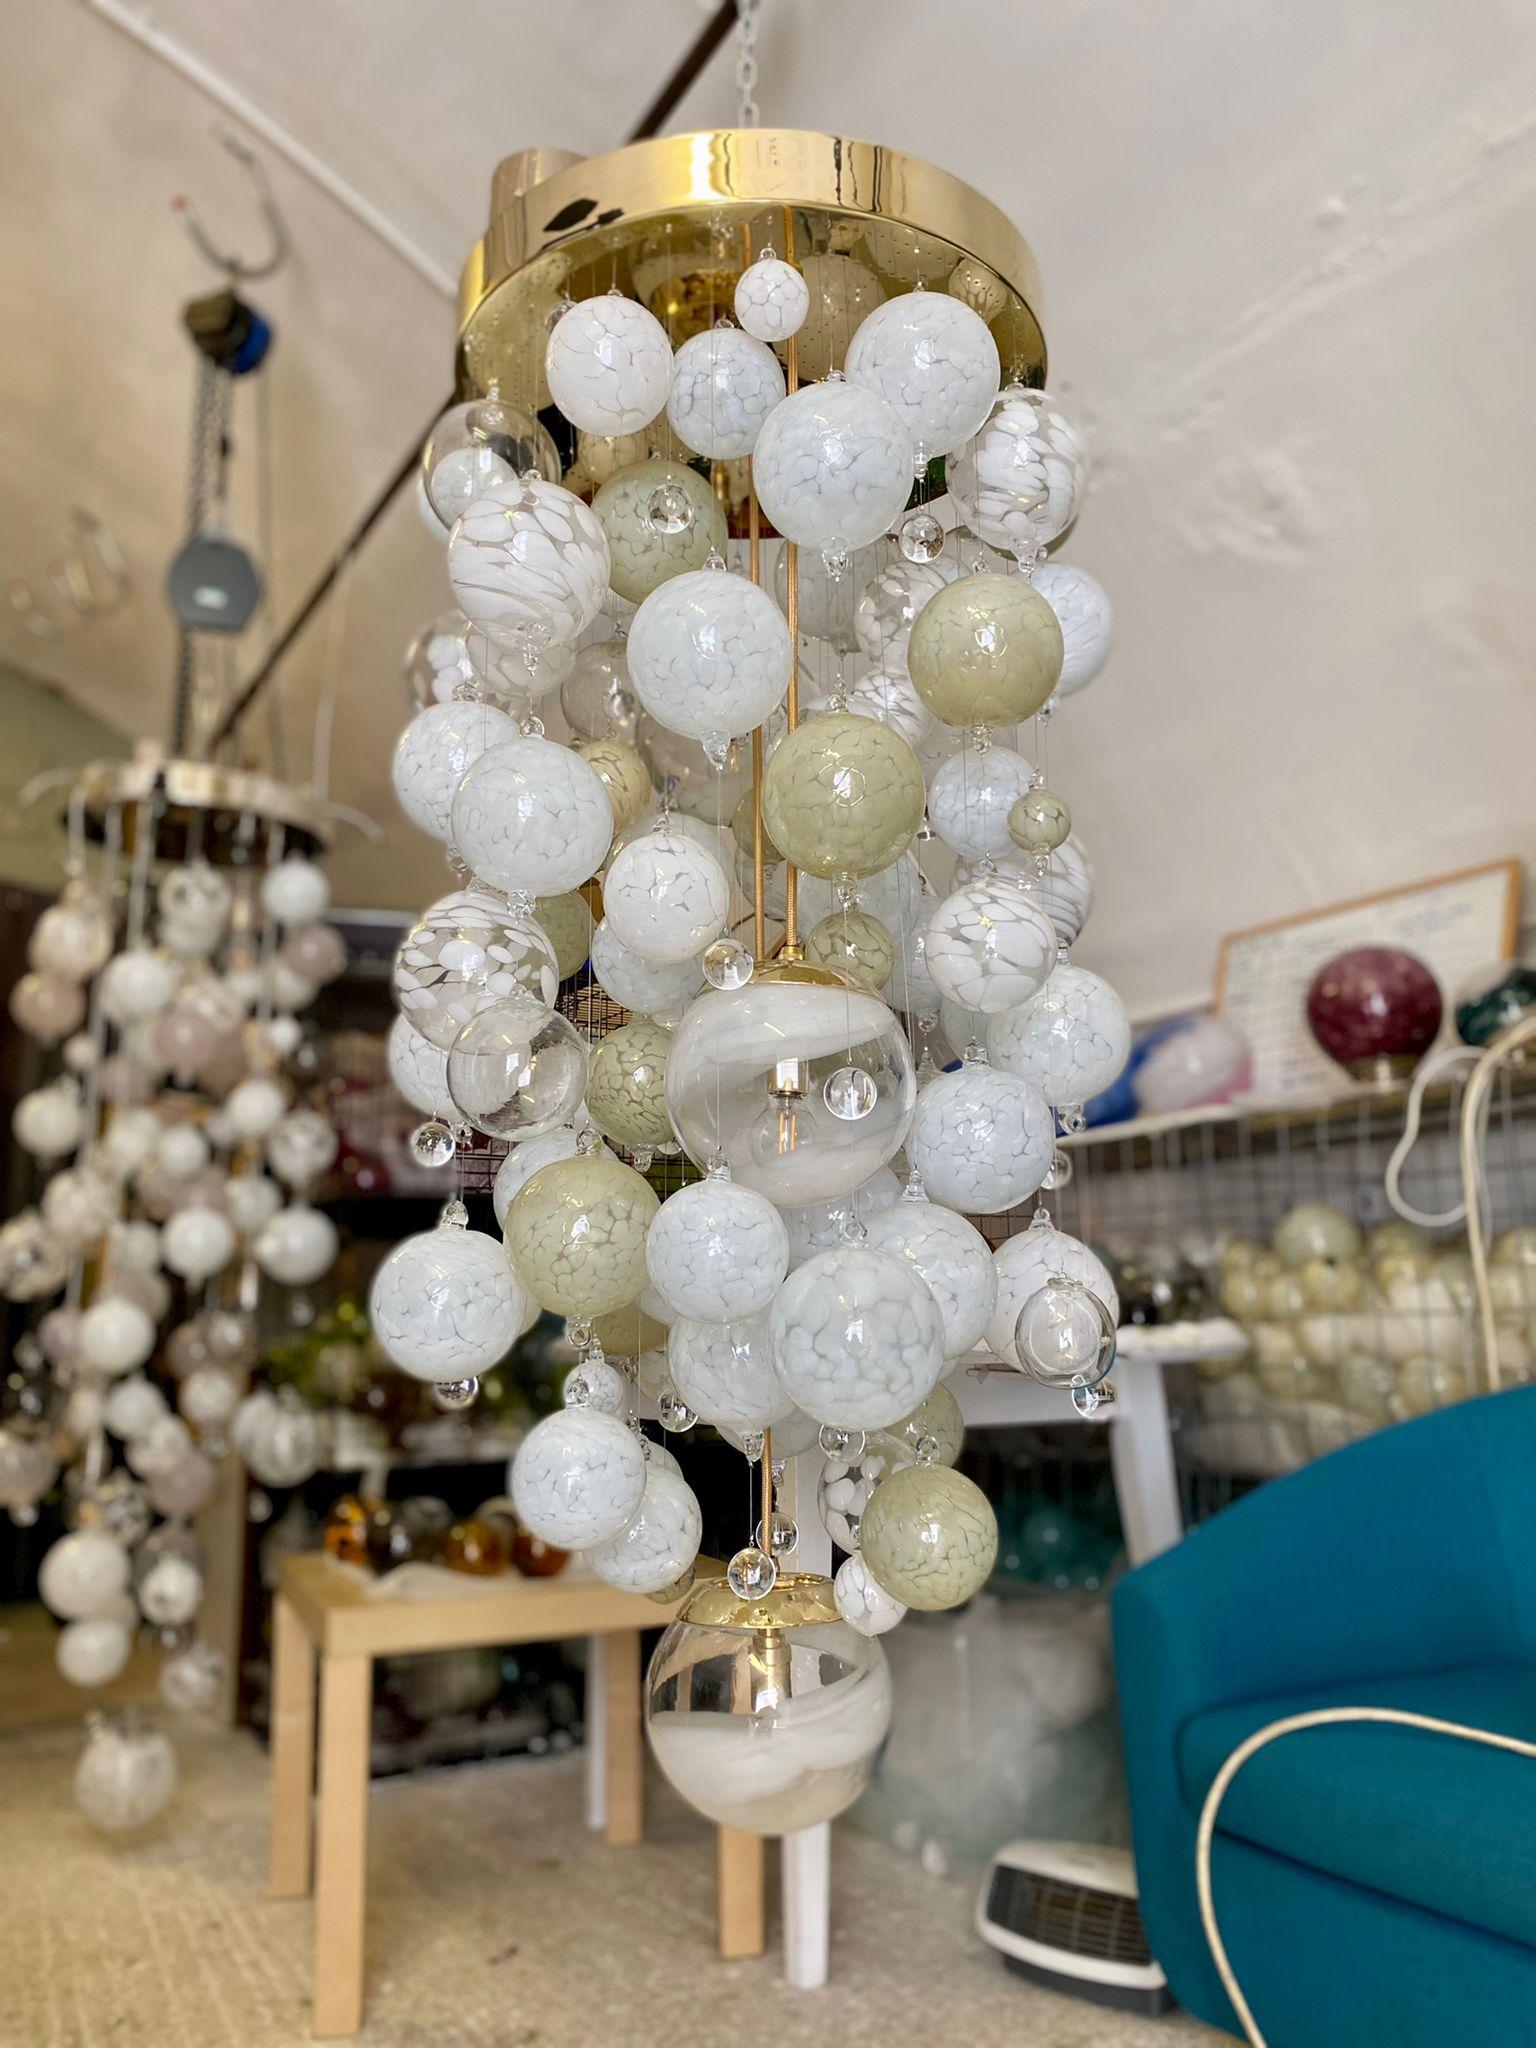 This contemporary chandelier is an Origin II design and features over 90 individually blown glass spheres. The glass is blown in Europe and the UK and the chandelier is designed and hand-crafted in our studio in London. 

This chandelier is